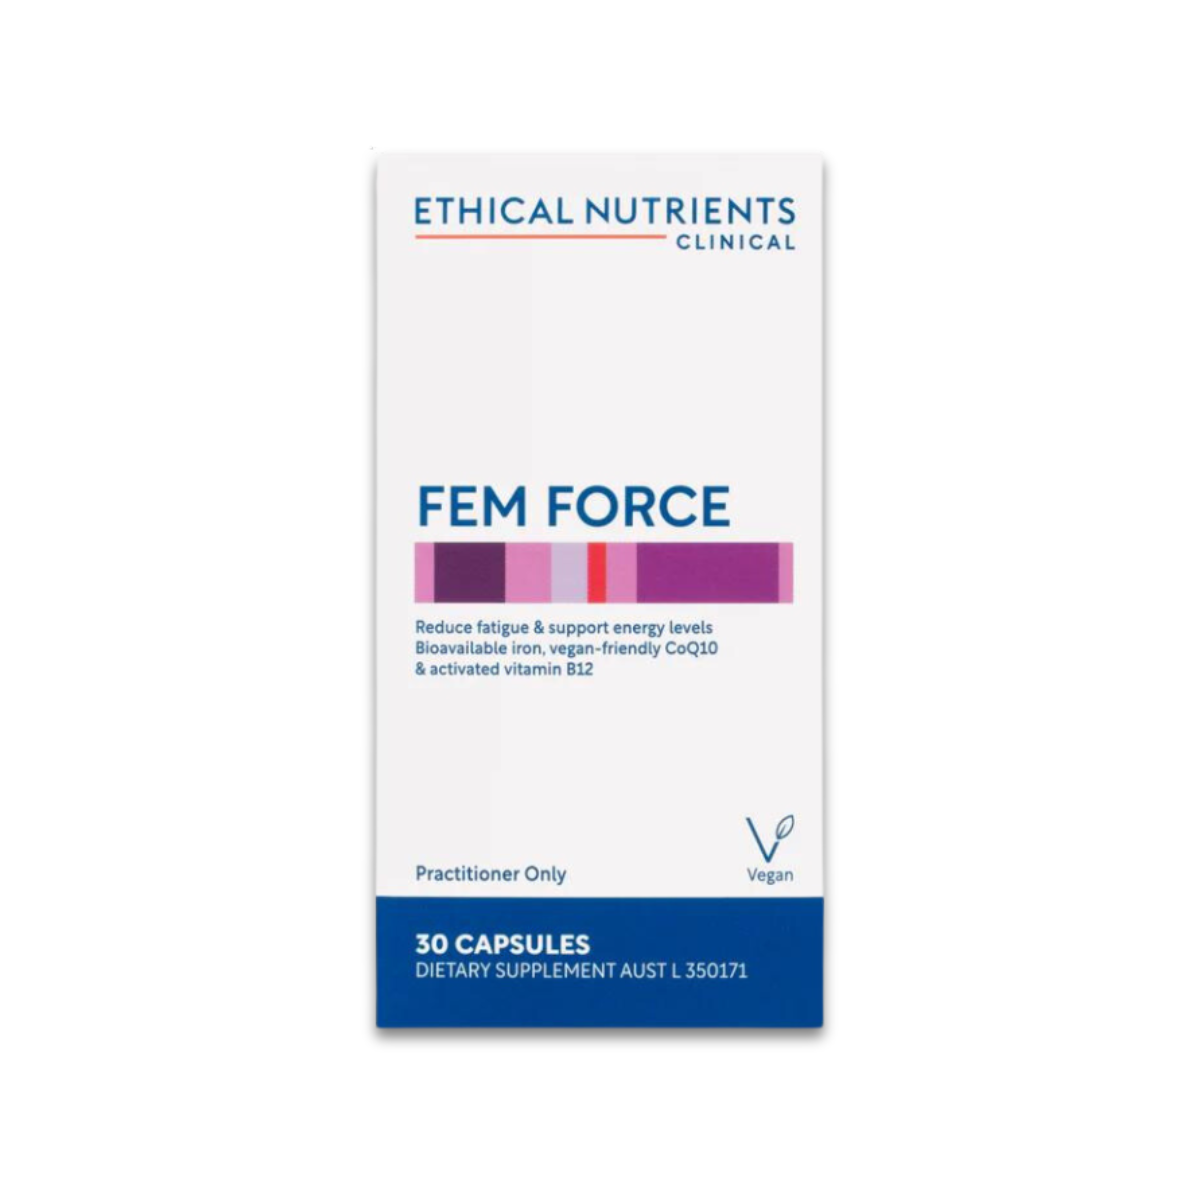 Ethical Nutrients Clinical Fem Force 30 Capsules 